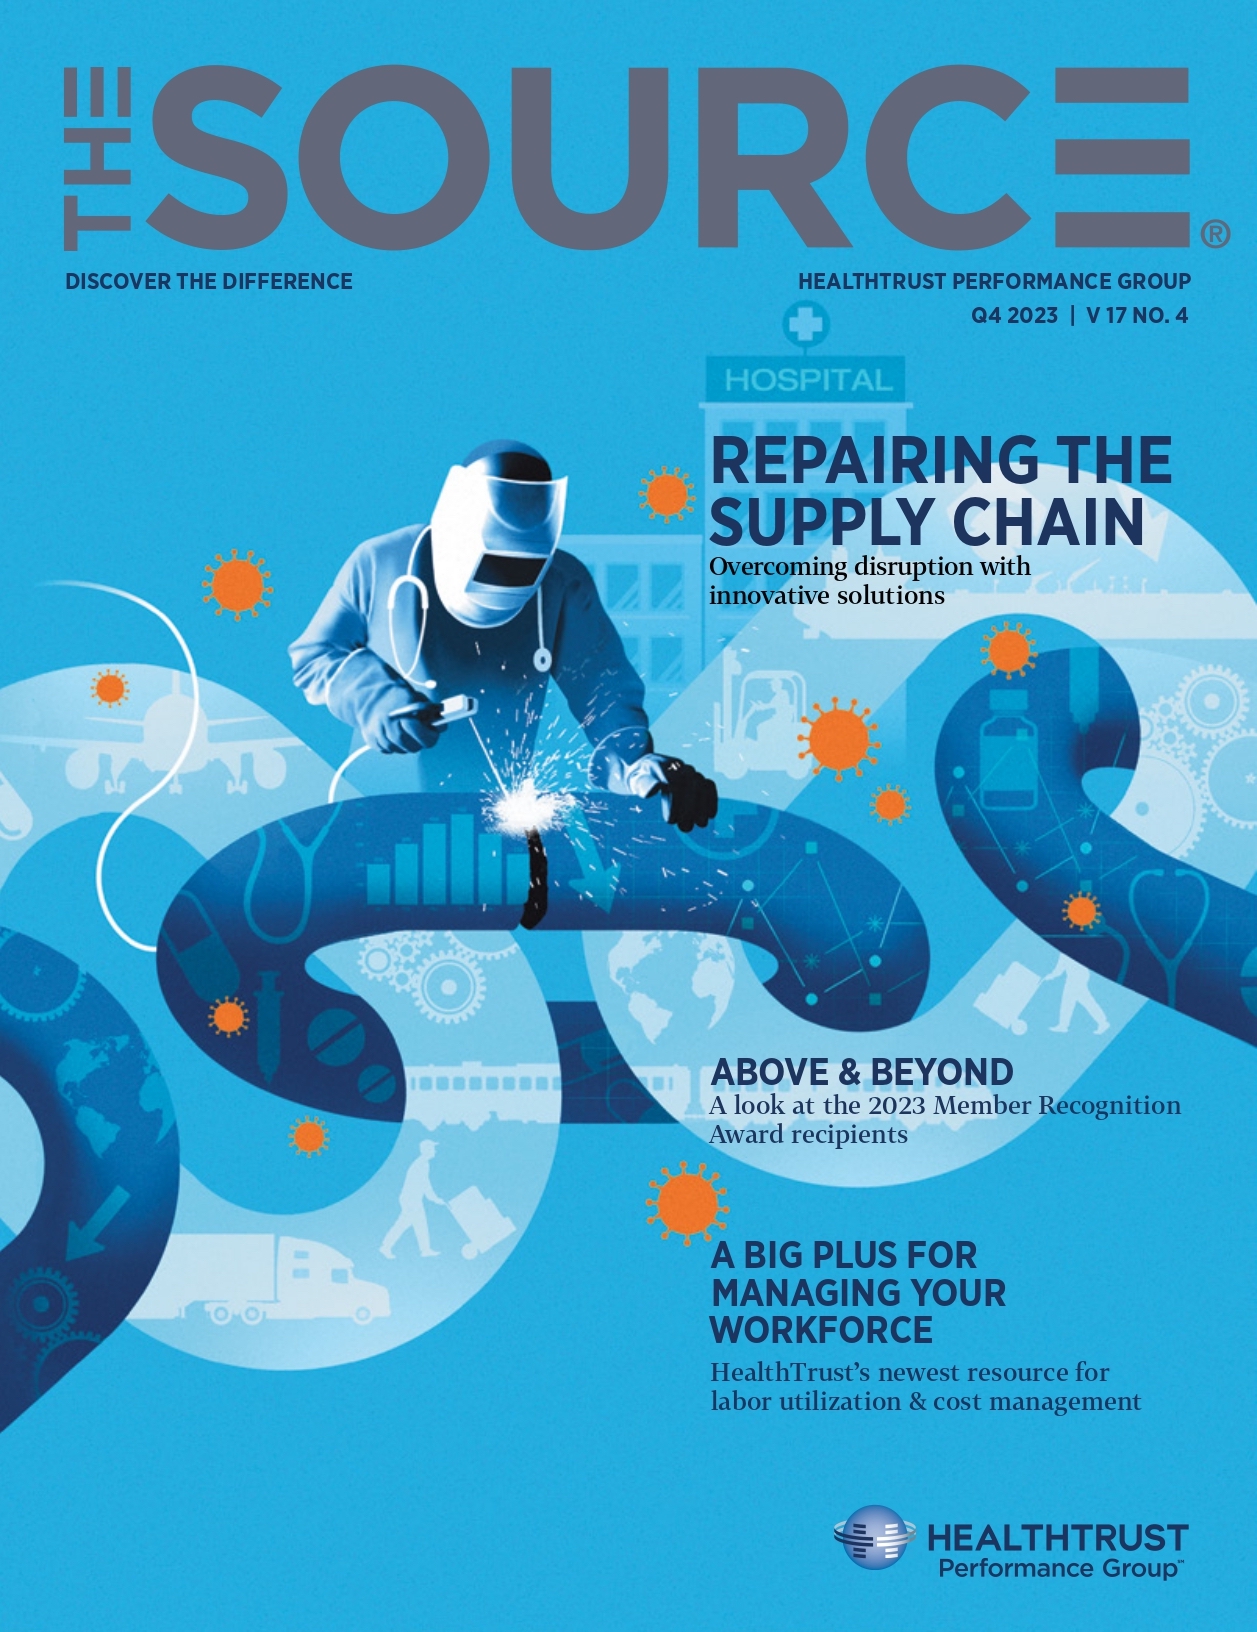 The Source - Download the Current Issue